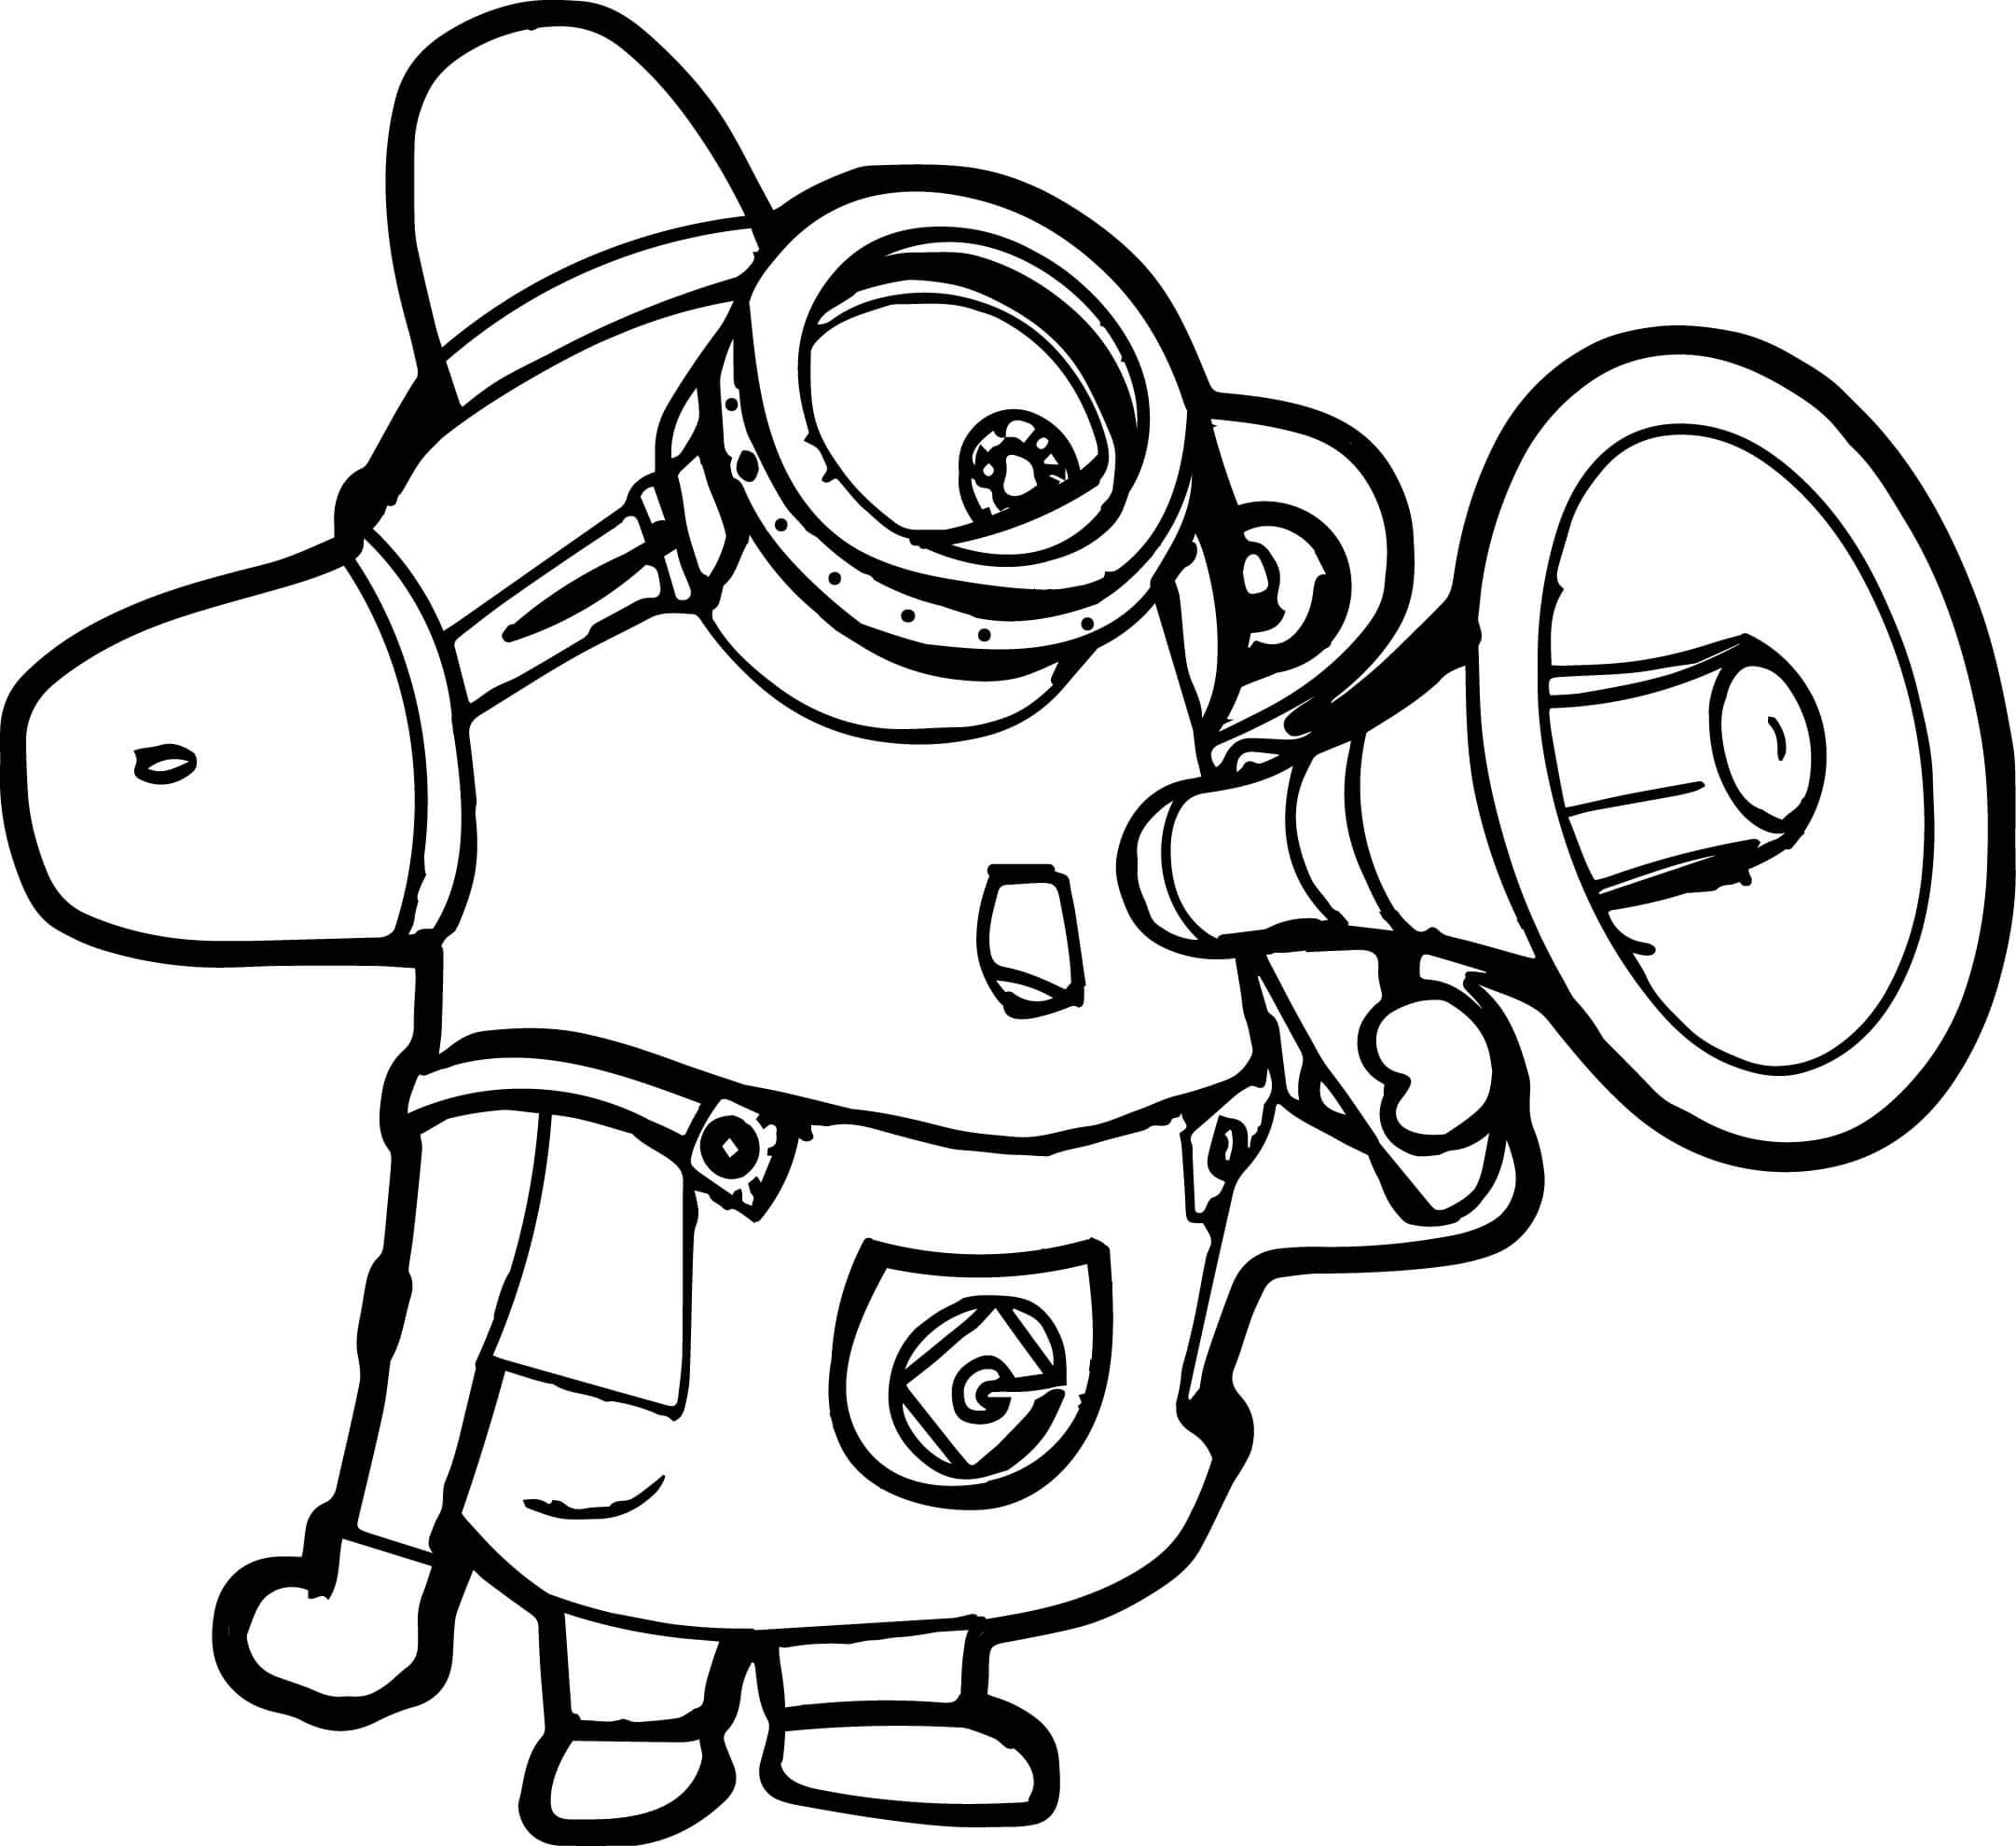 Hello Minion Minions Coloring Page Wecoloringpage The Best Porn Website